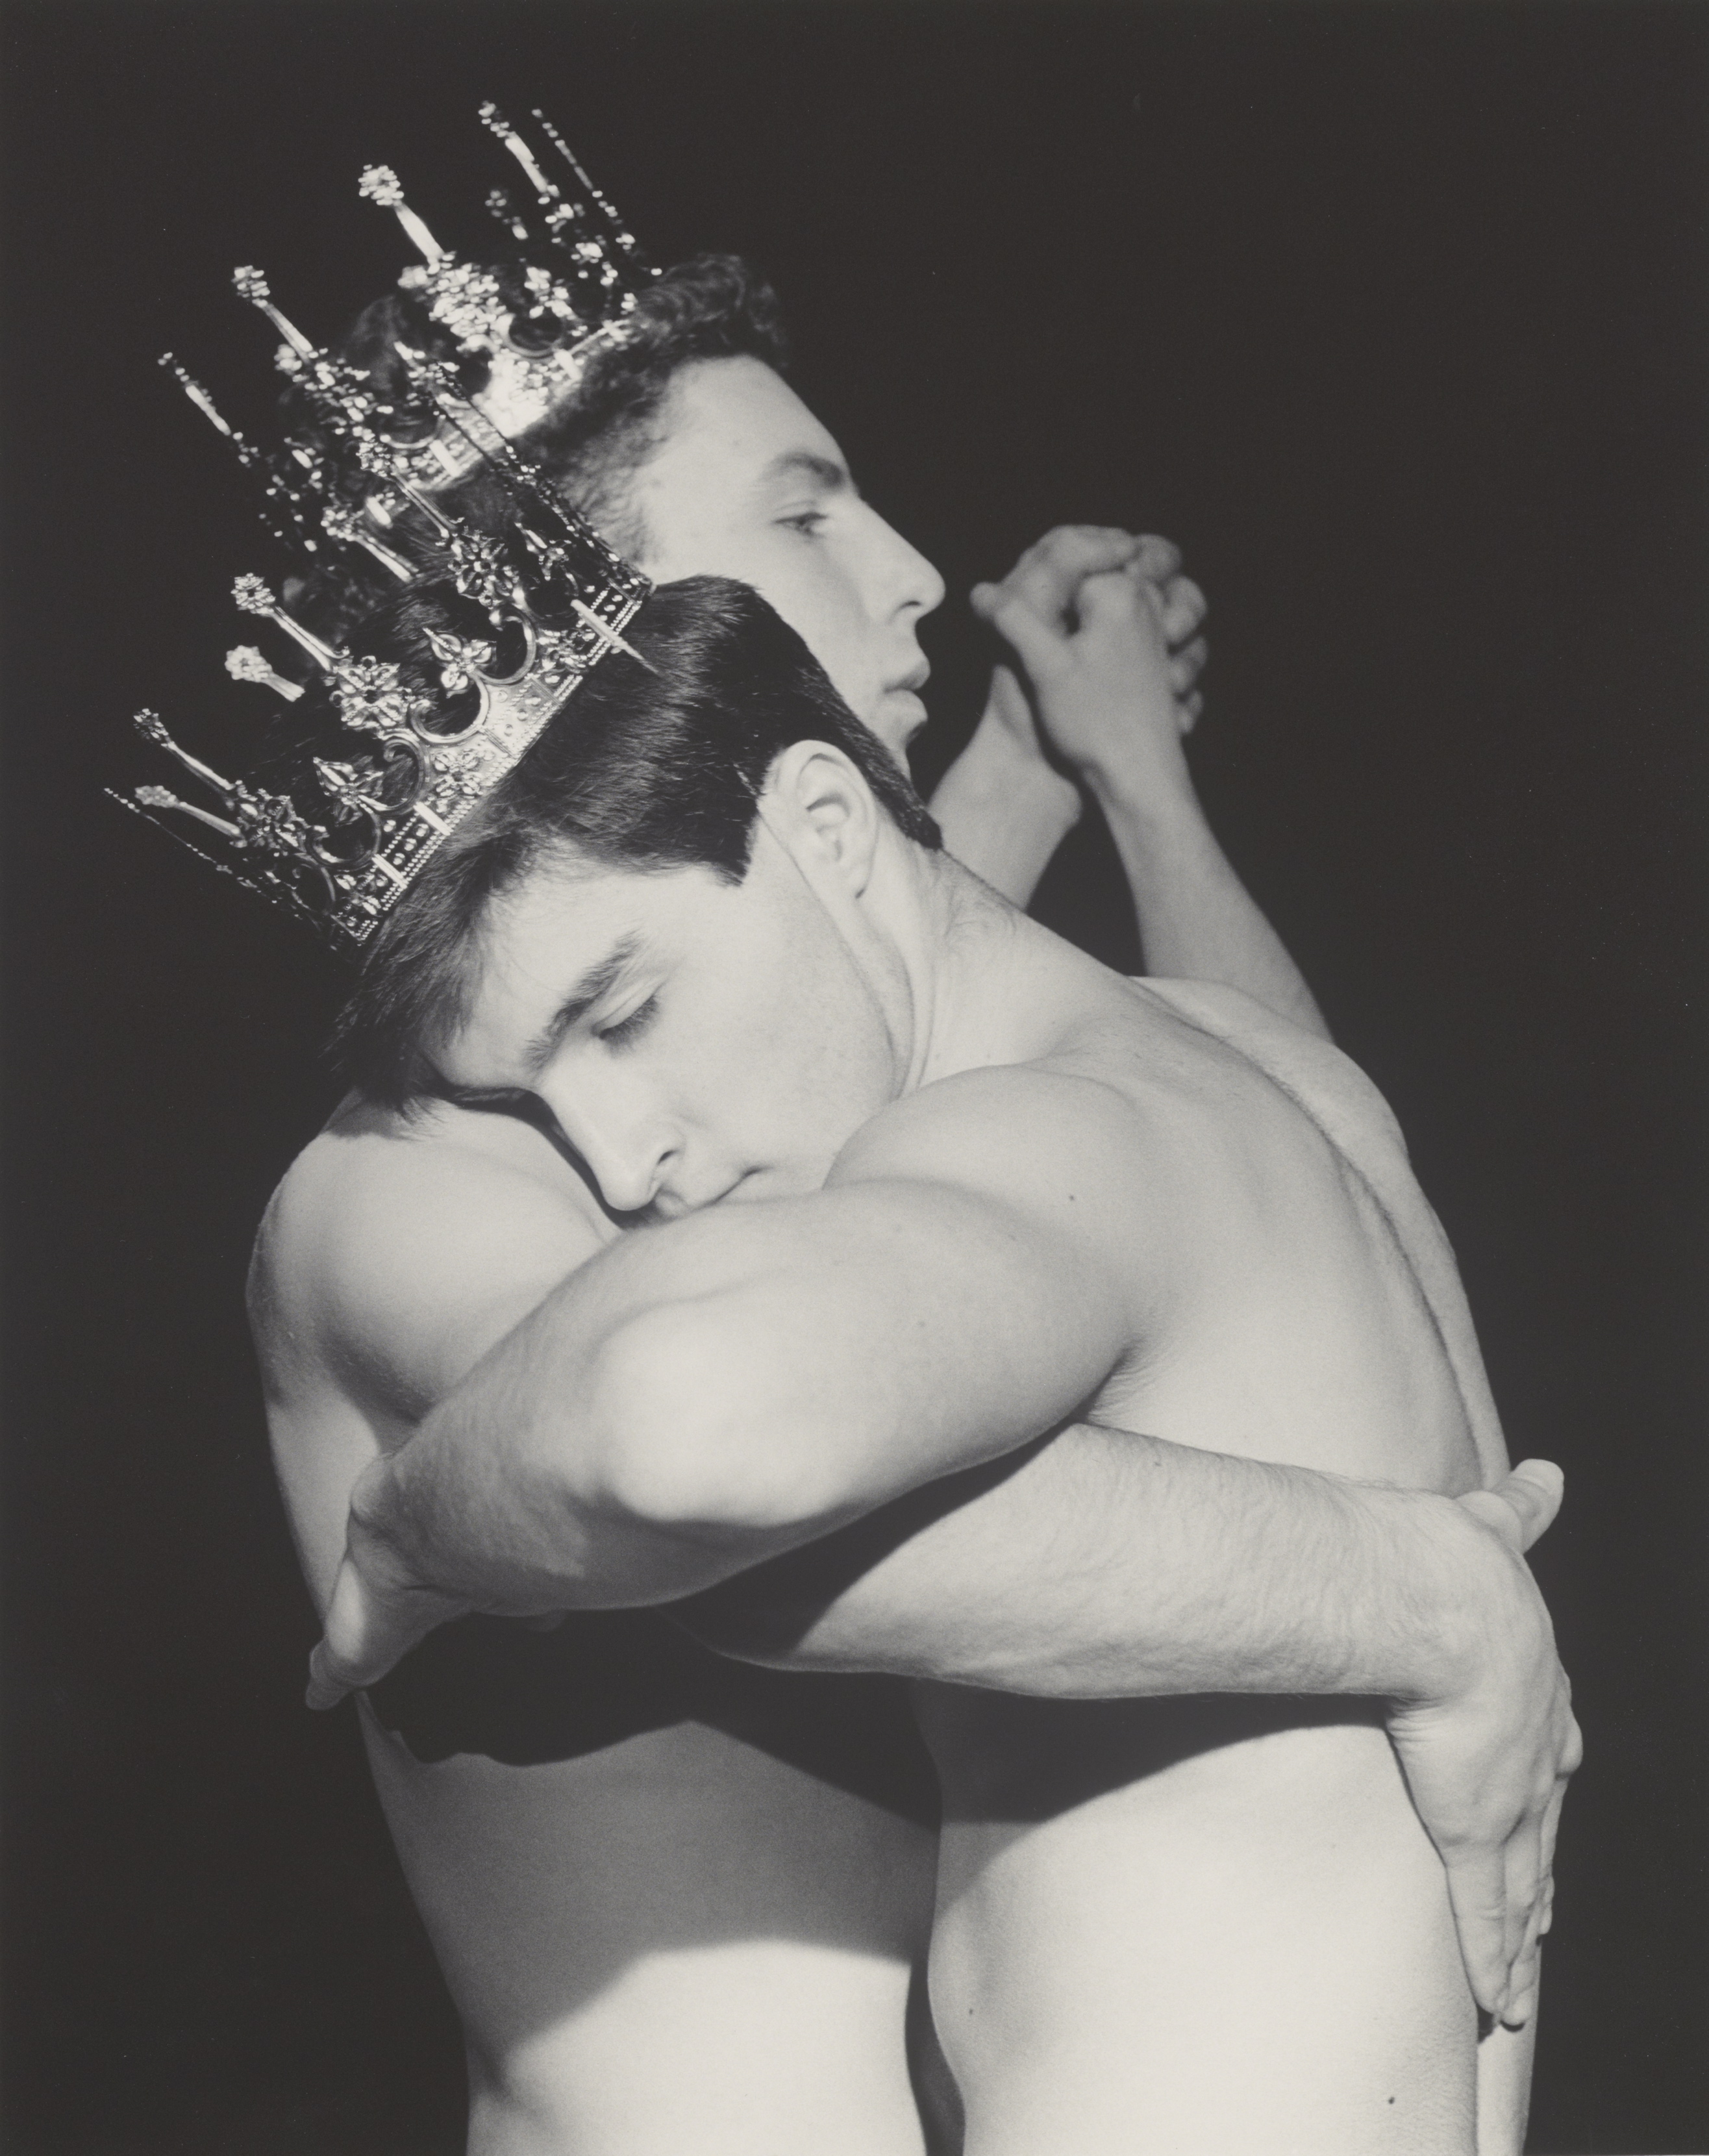 Black and white photograph of two muscular young men in a dancing pose, both wearing crowns.